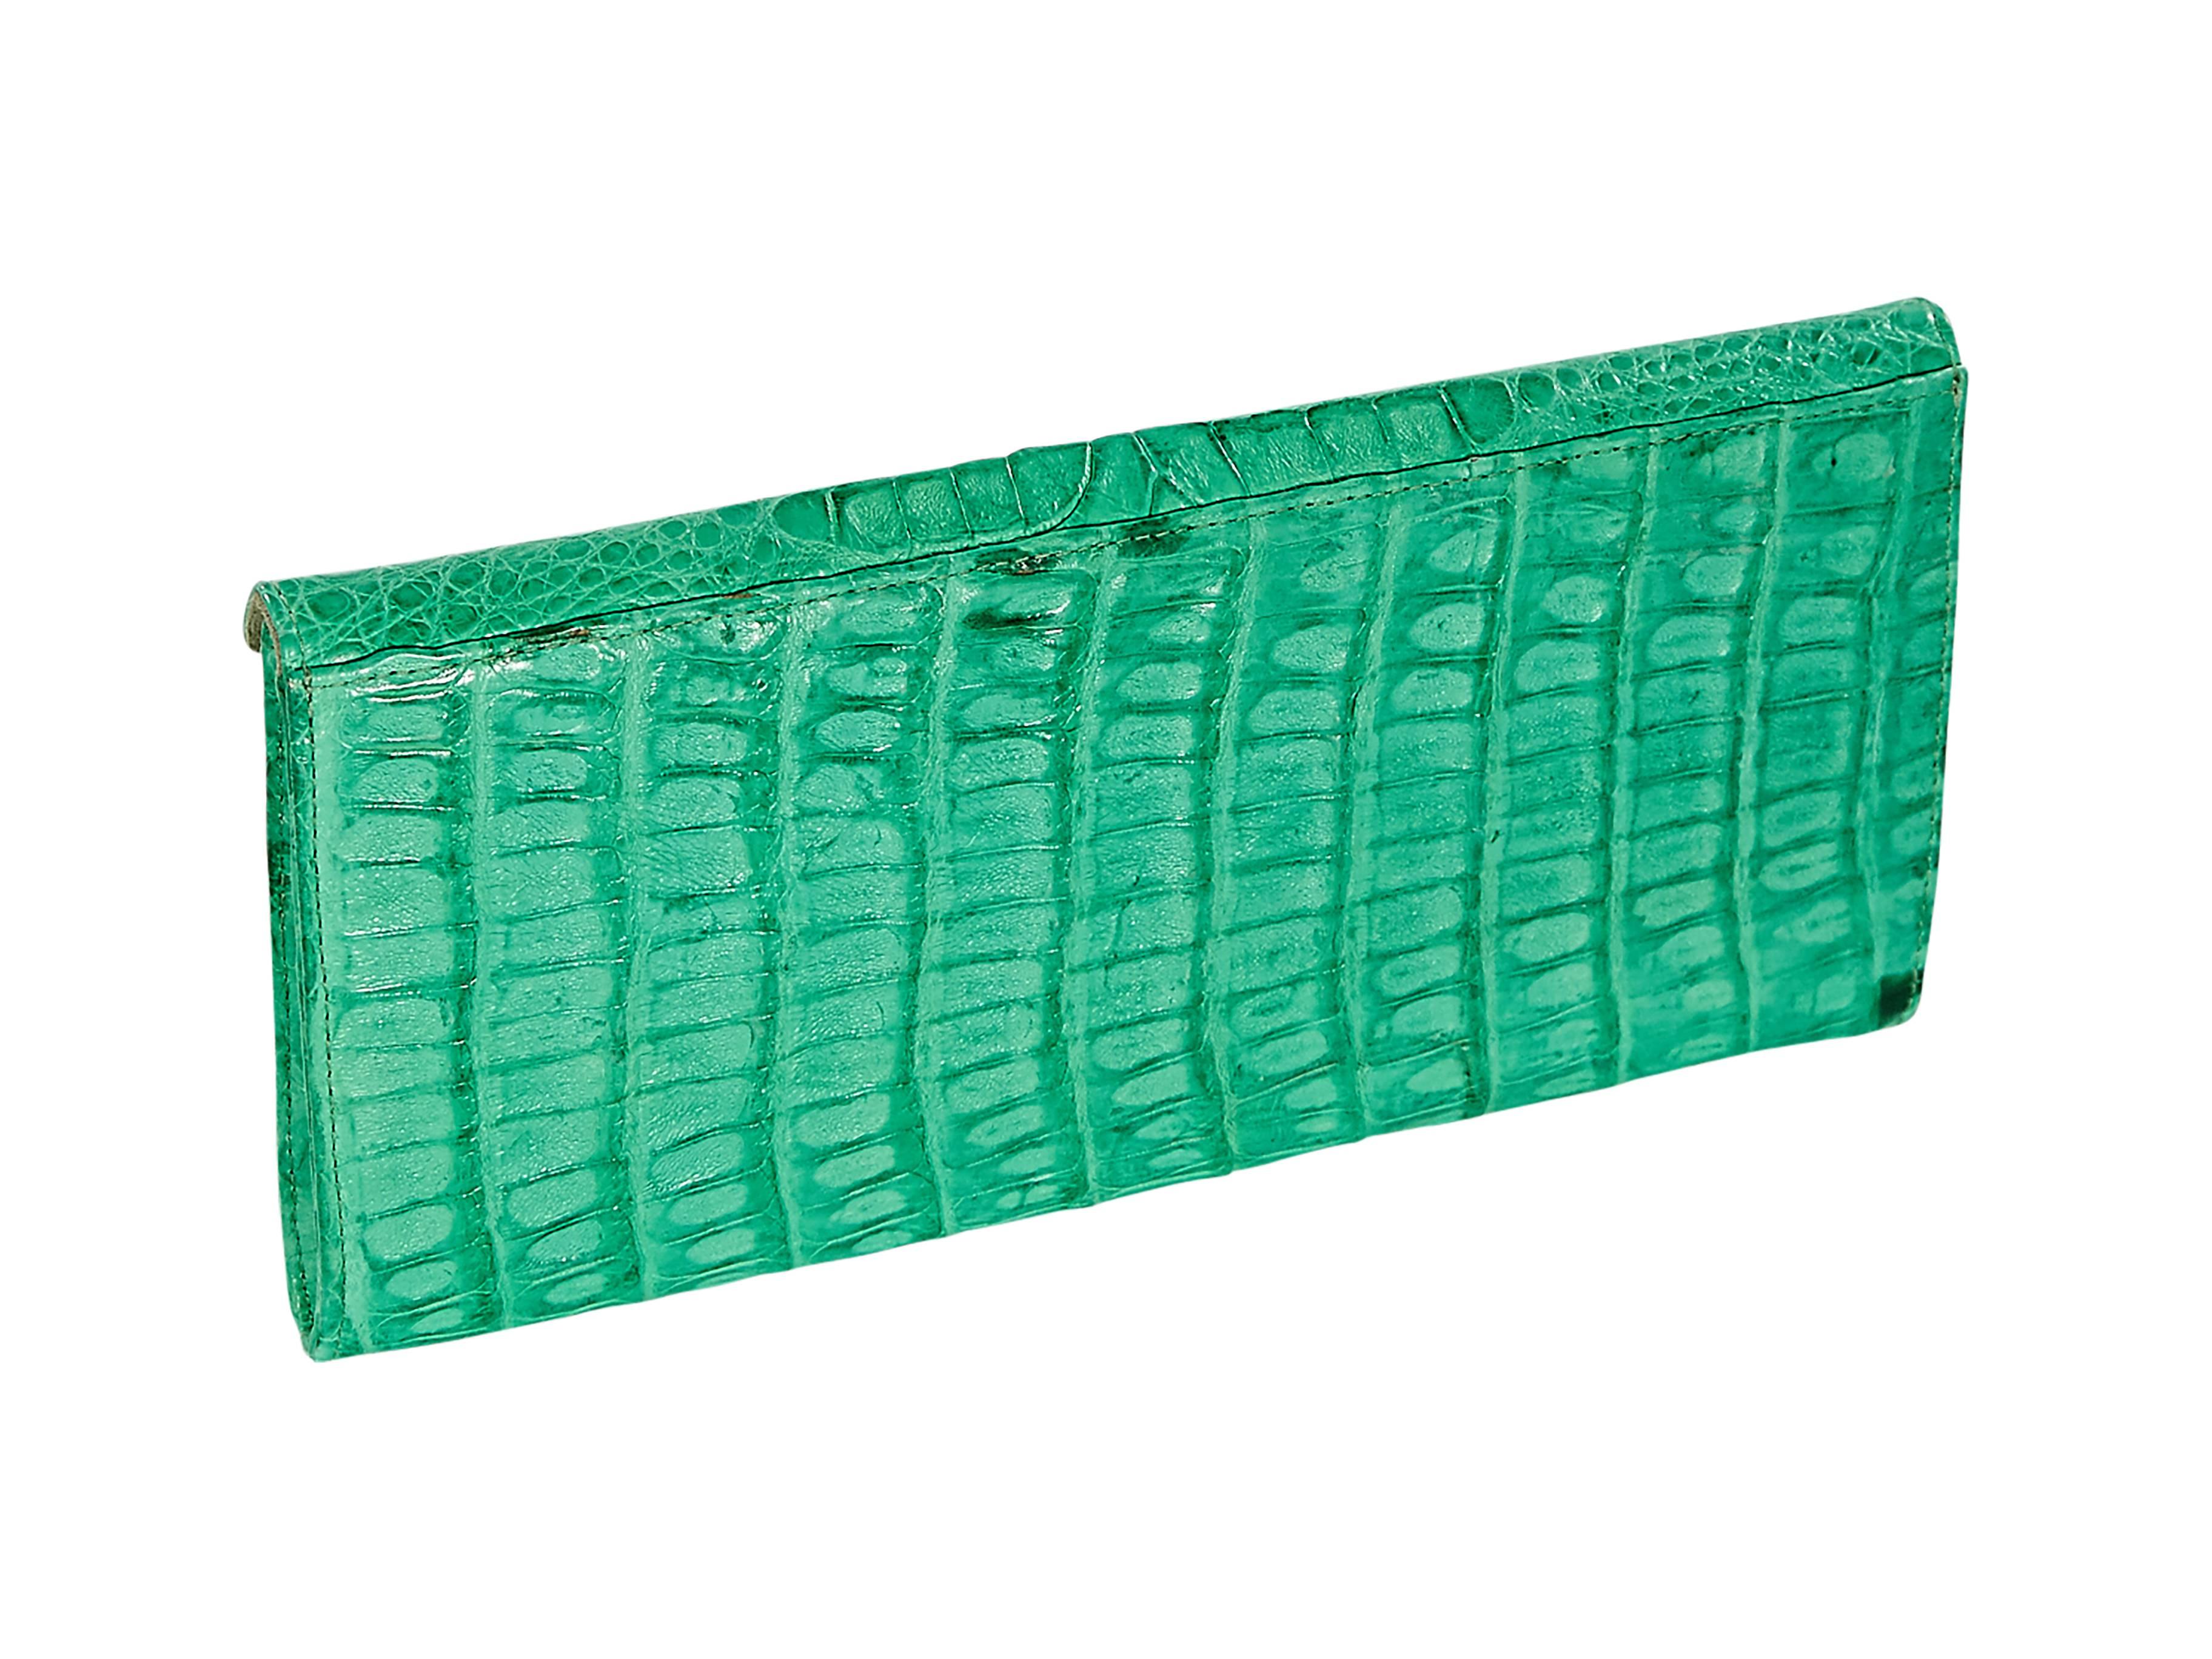  Green crocodile clutch by LAI.  Front flap with hidden magnetic closure.  Lined interior with zip pocket.  